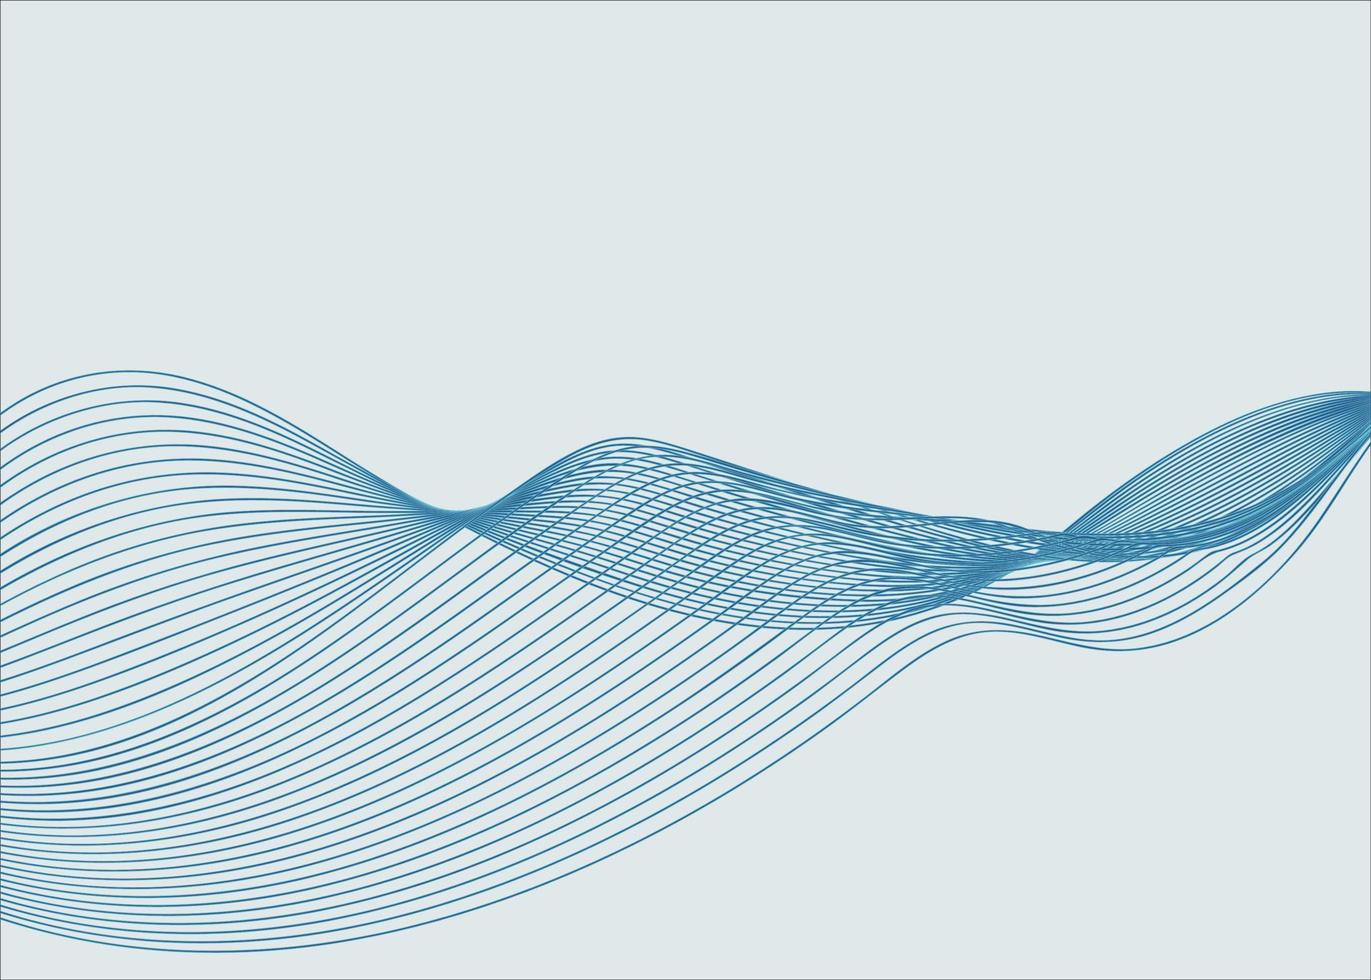 Abstract blue wave on a gray background. Dynamic sound wave. Optical art design element. Vector illustration.